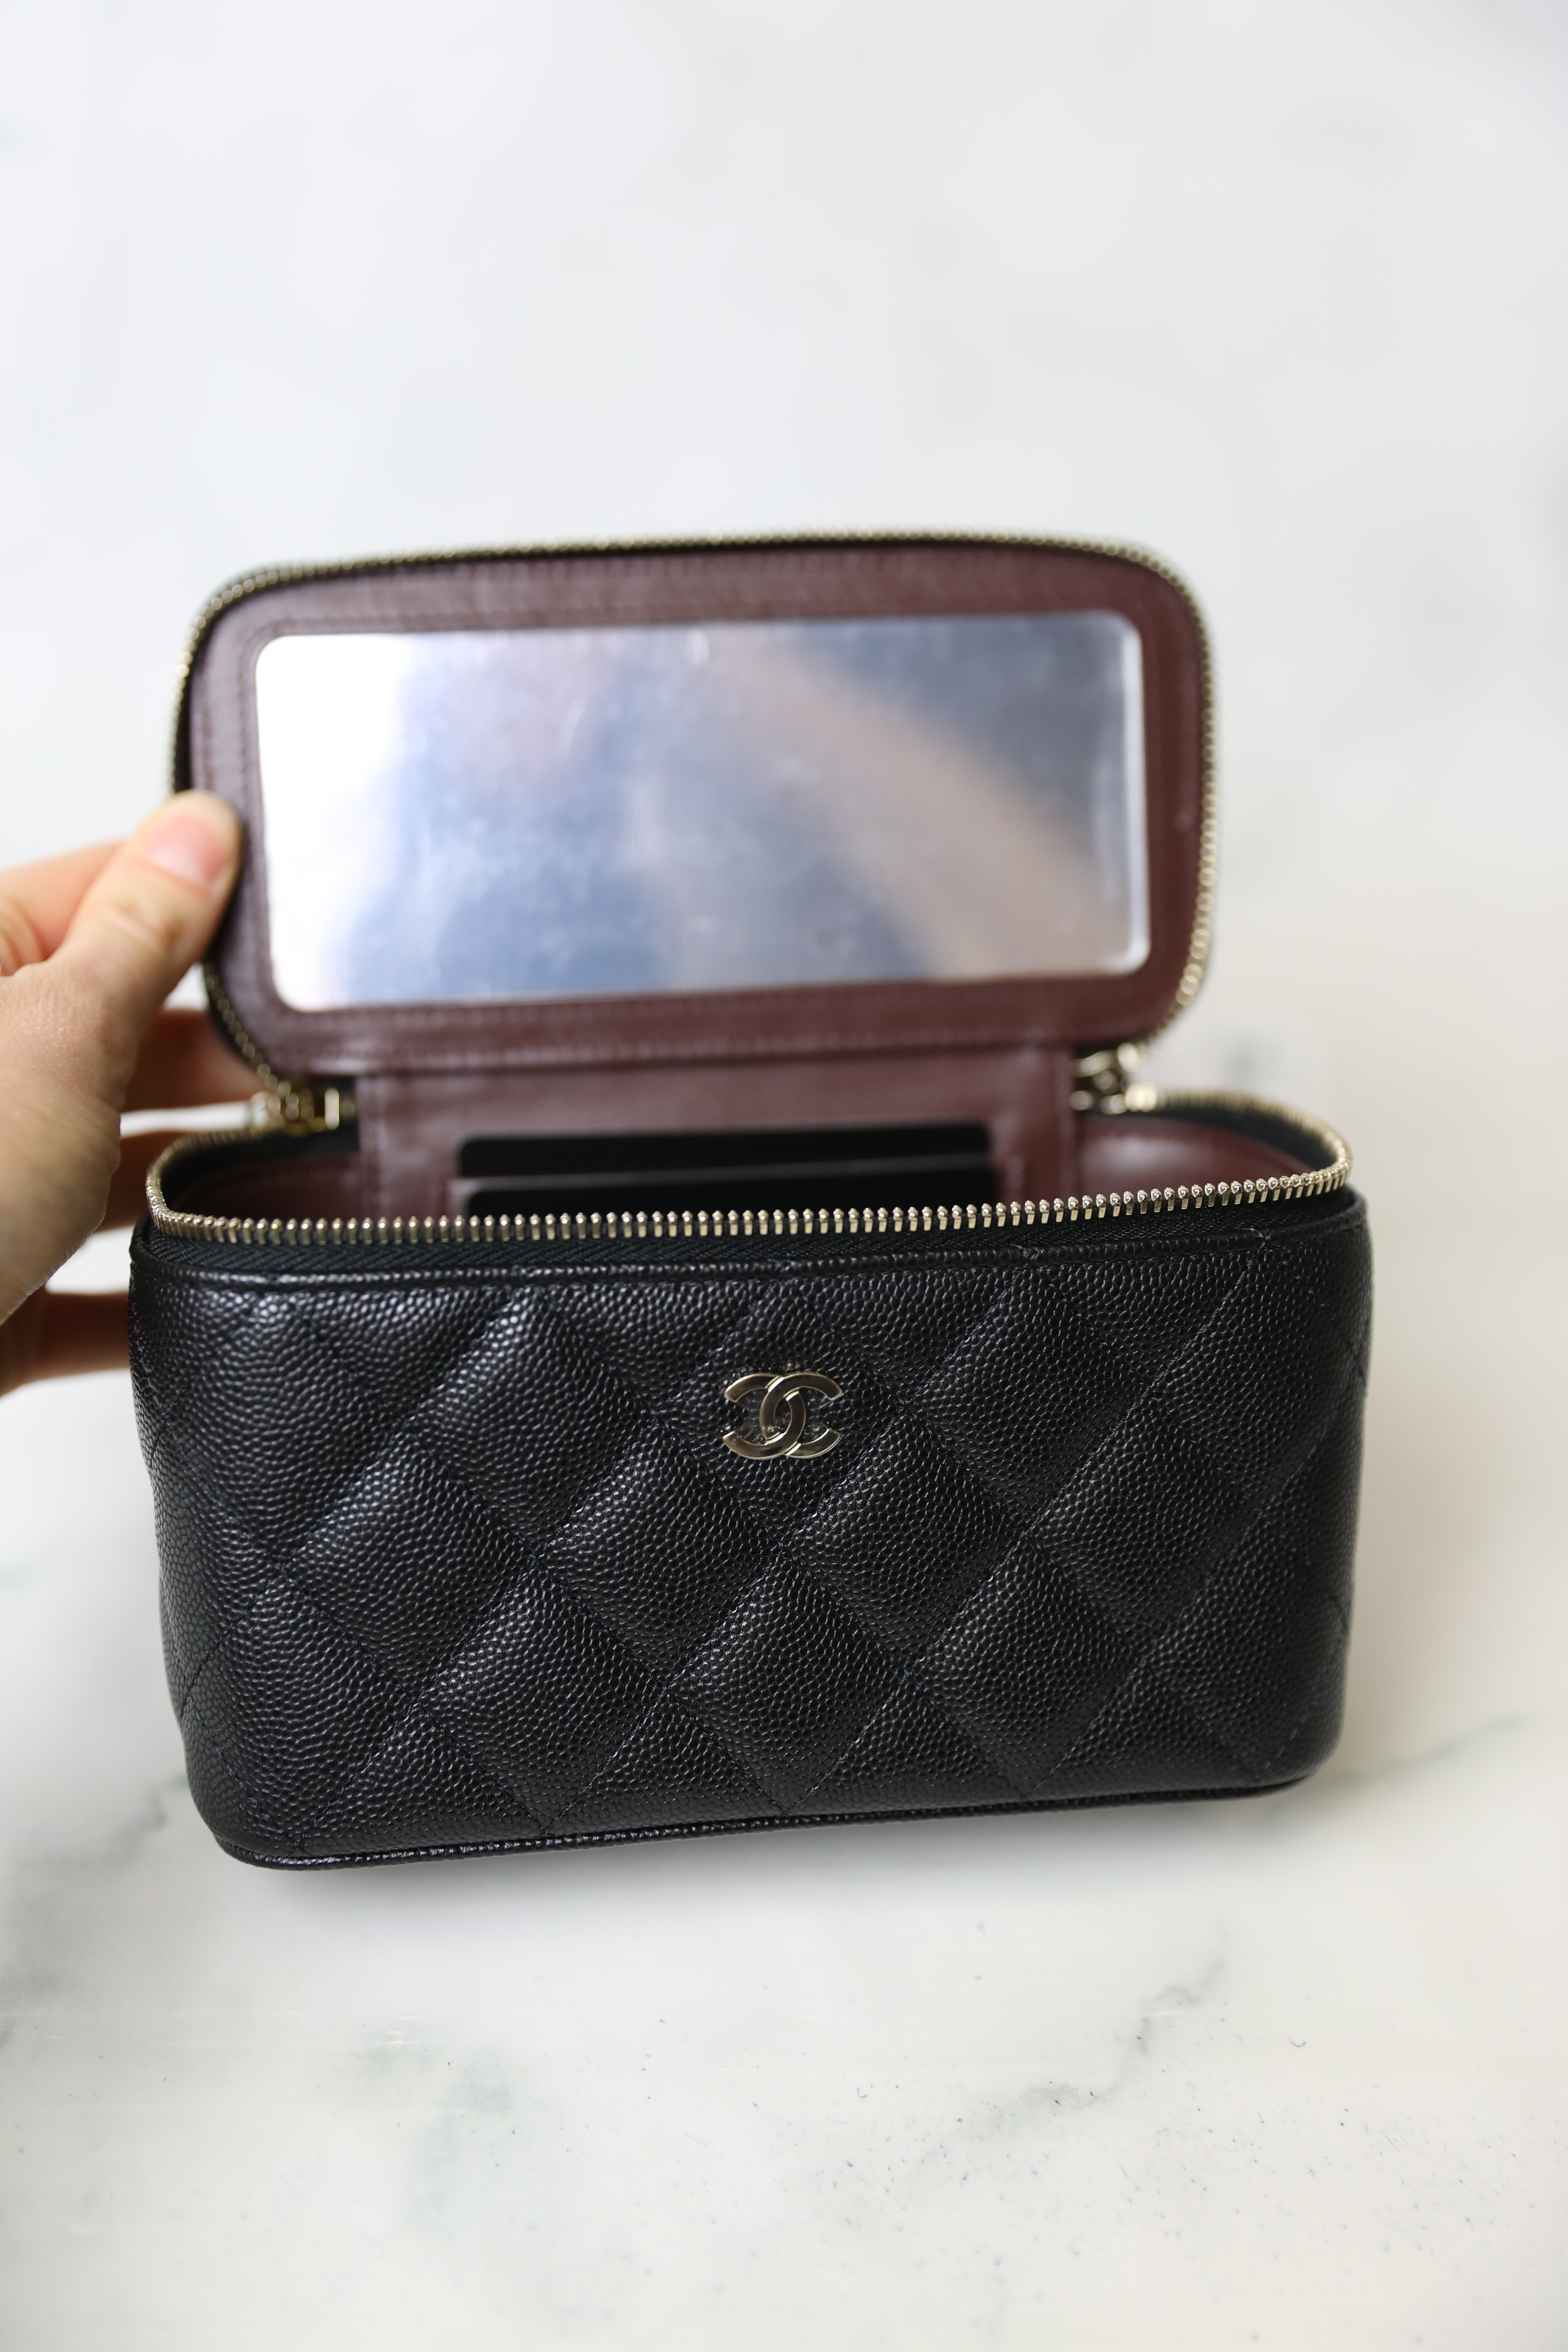 Chanel Vanity with Chain Black Caviar Gold Hardware 22S – Coco